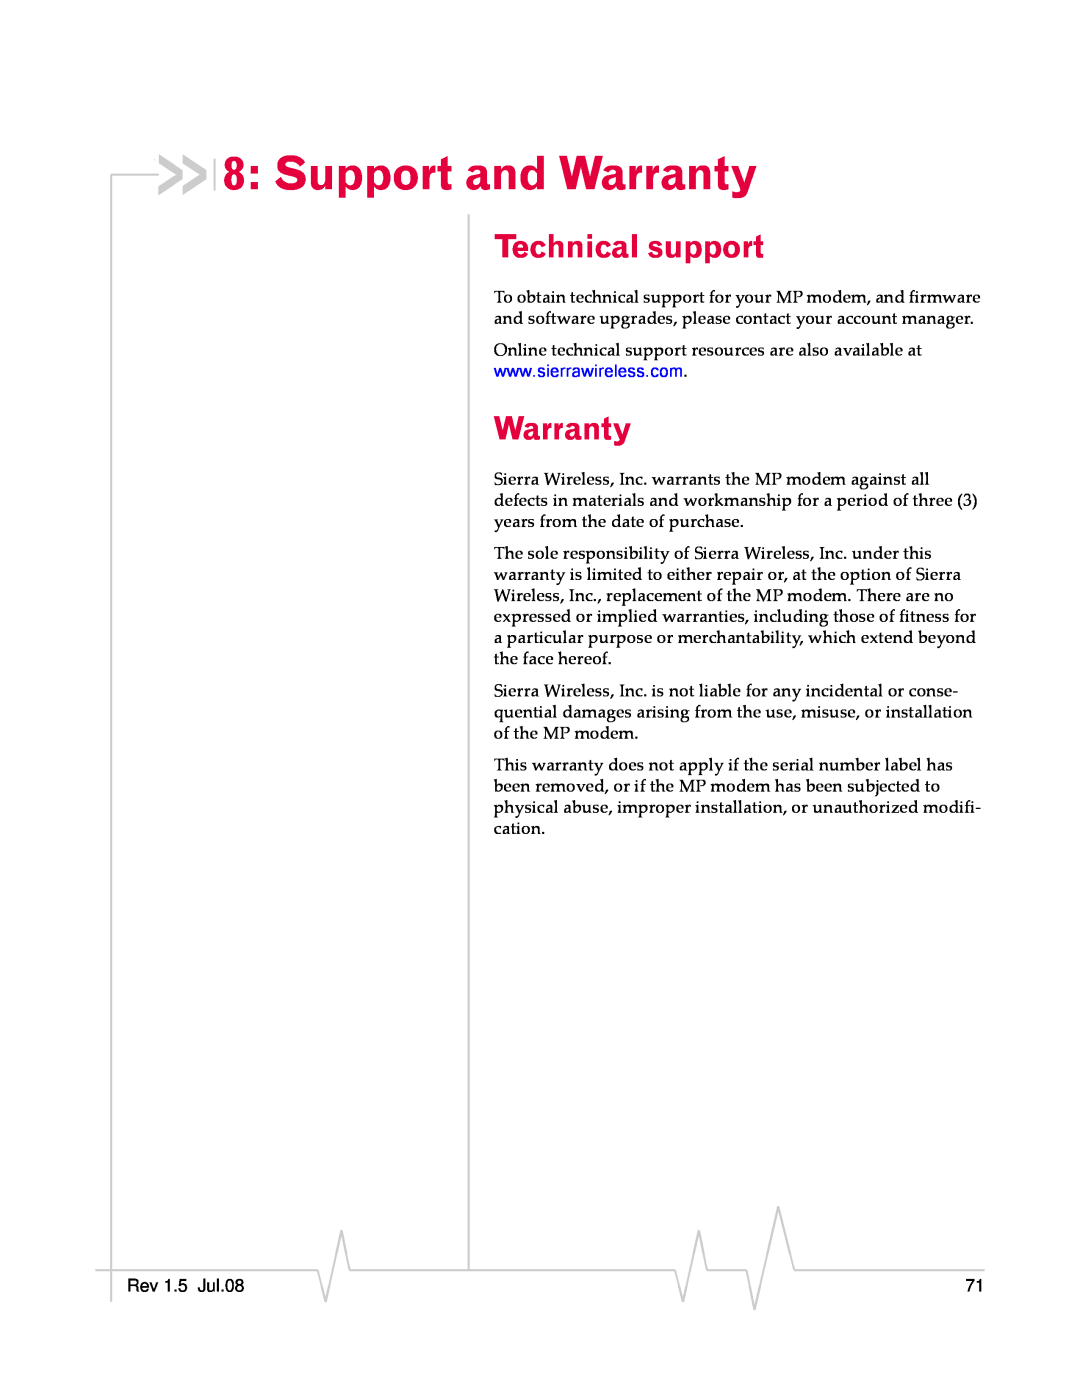 Sierra Wireless MP 880W manual Support and Warranty, Technical support 